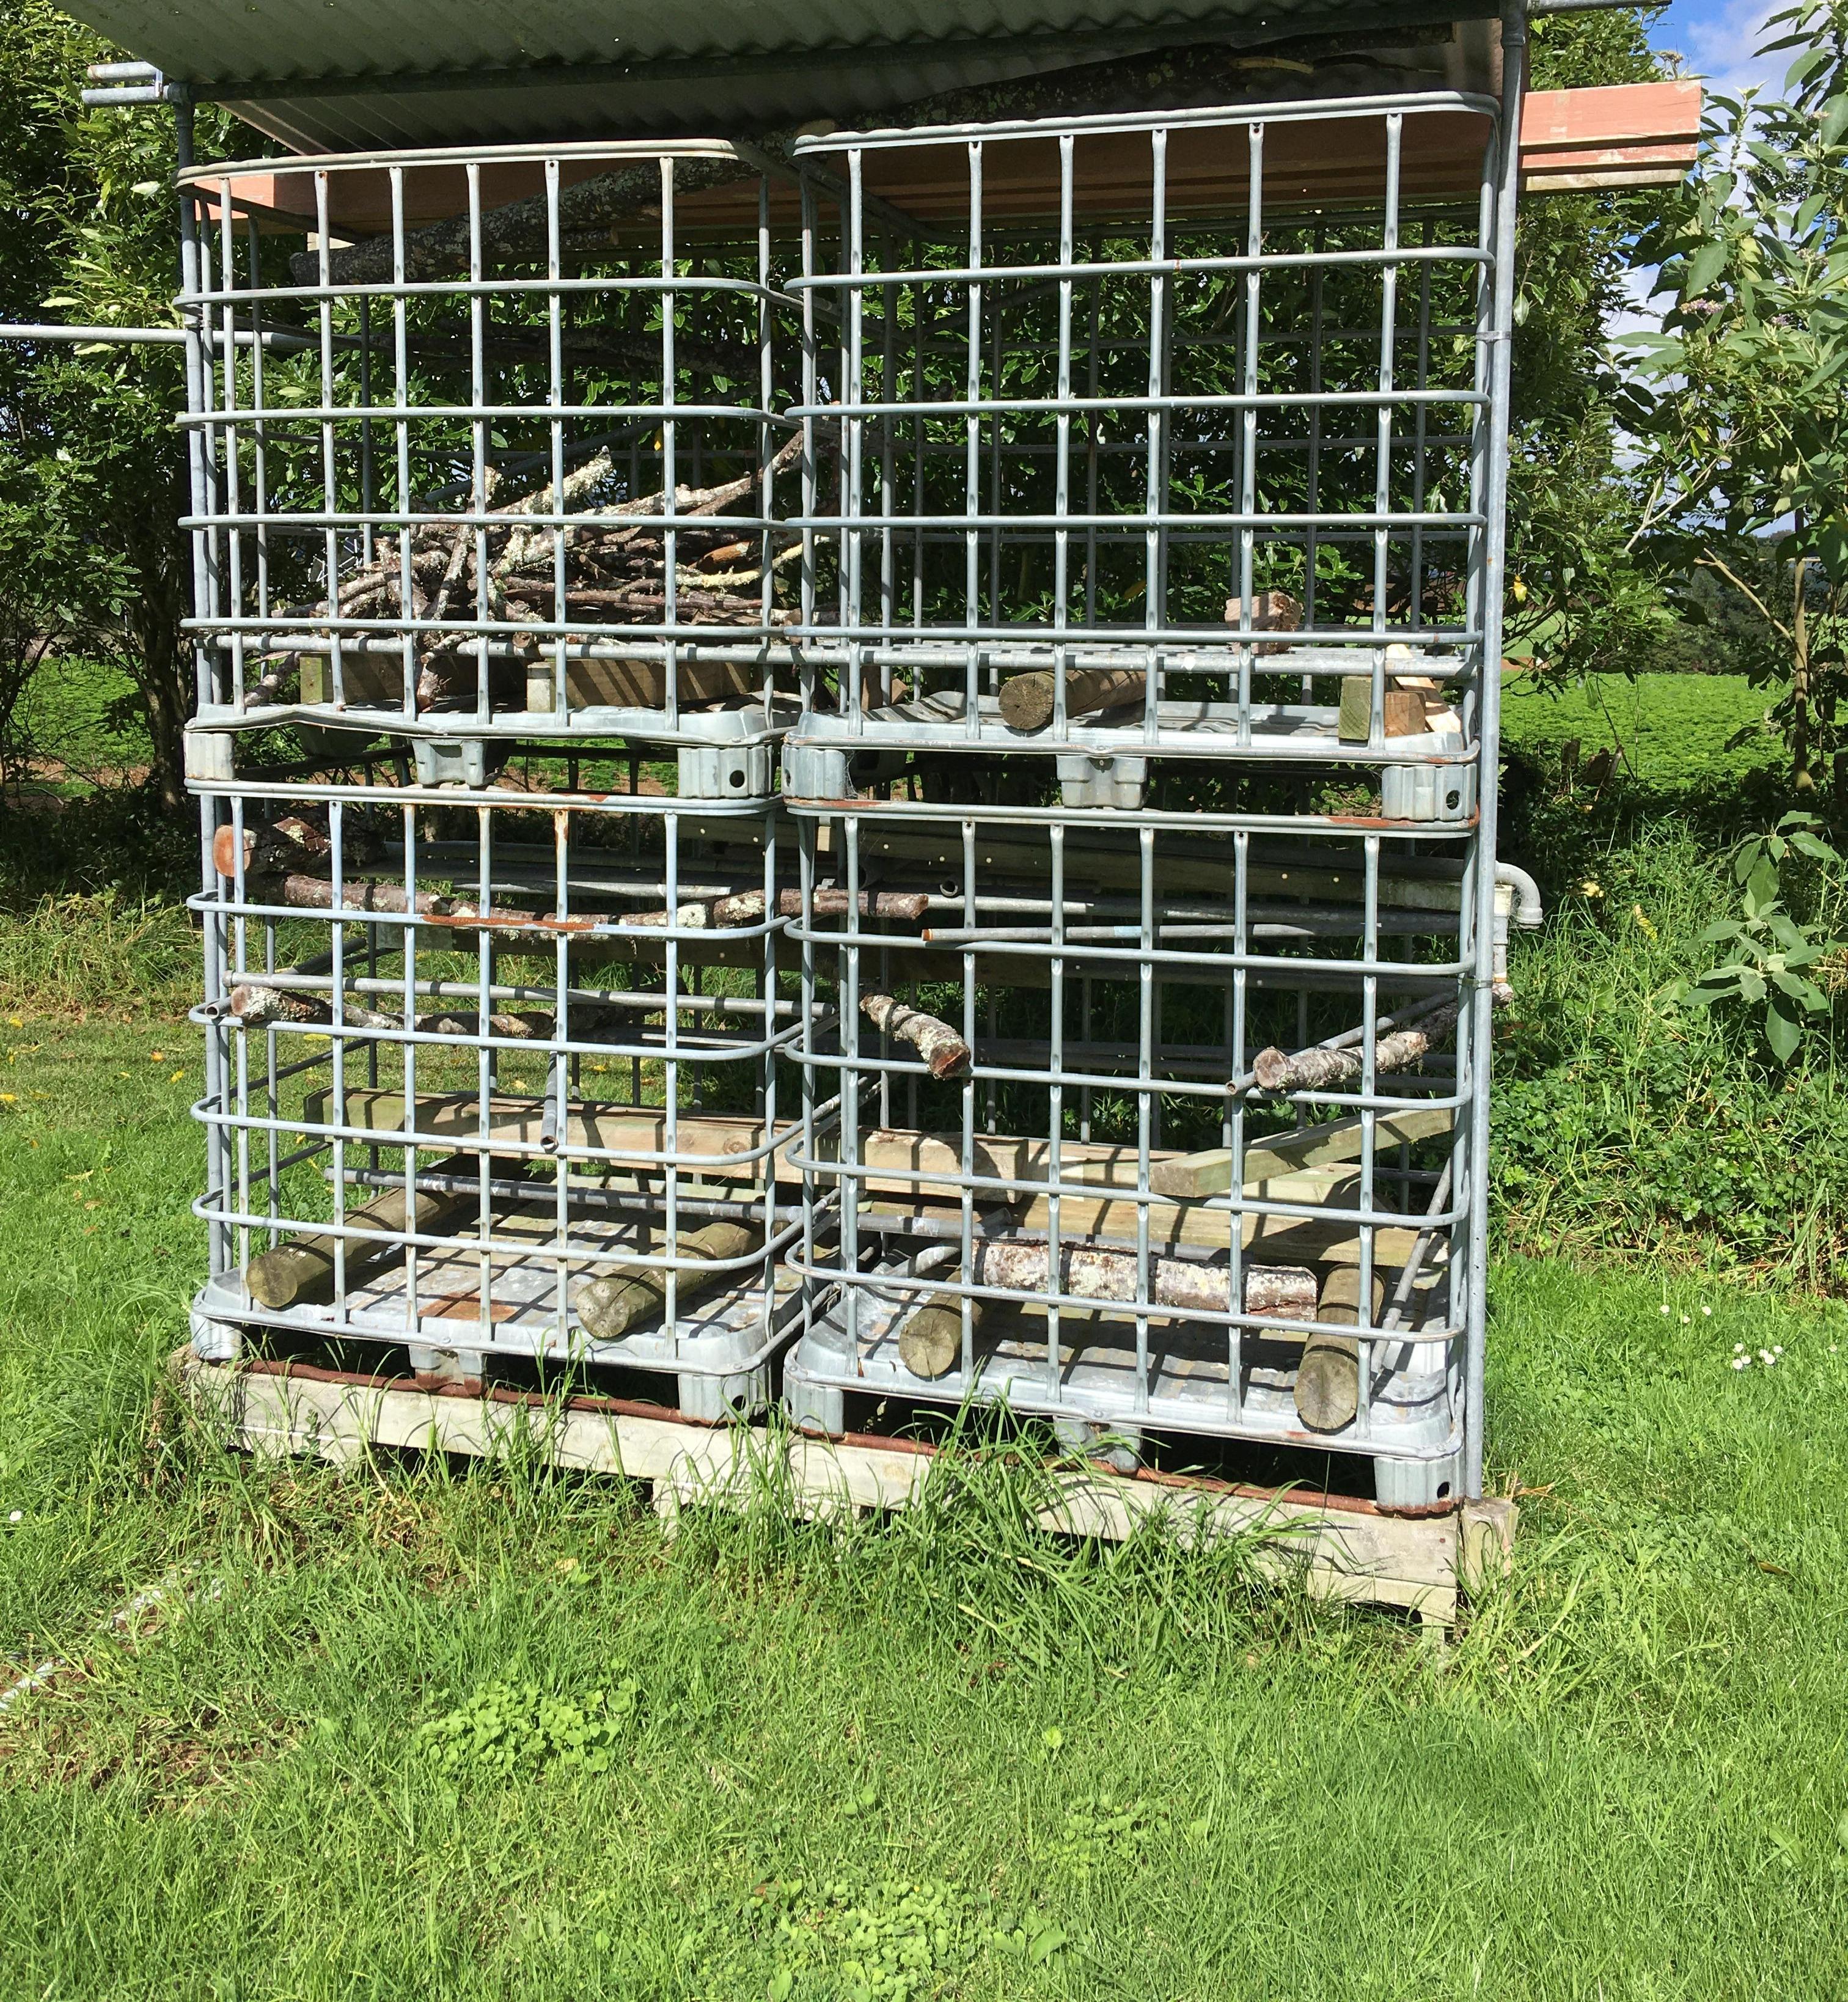 Firewood Storage From IBC Cages